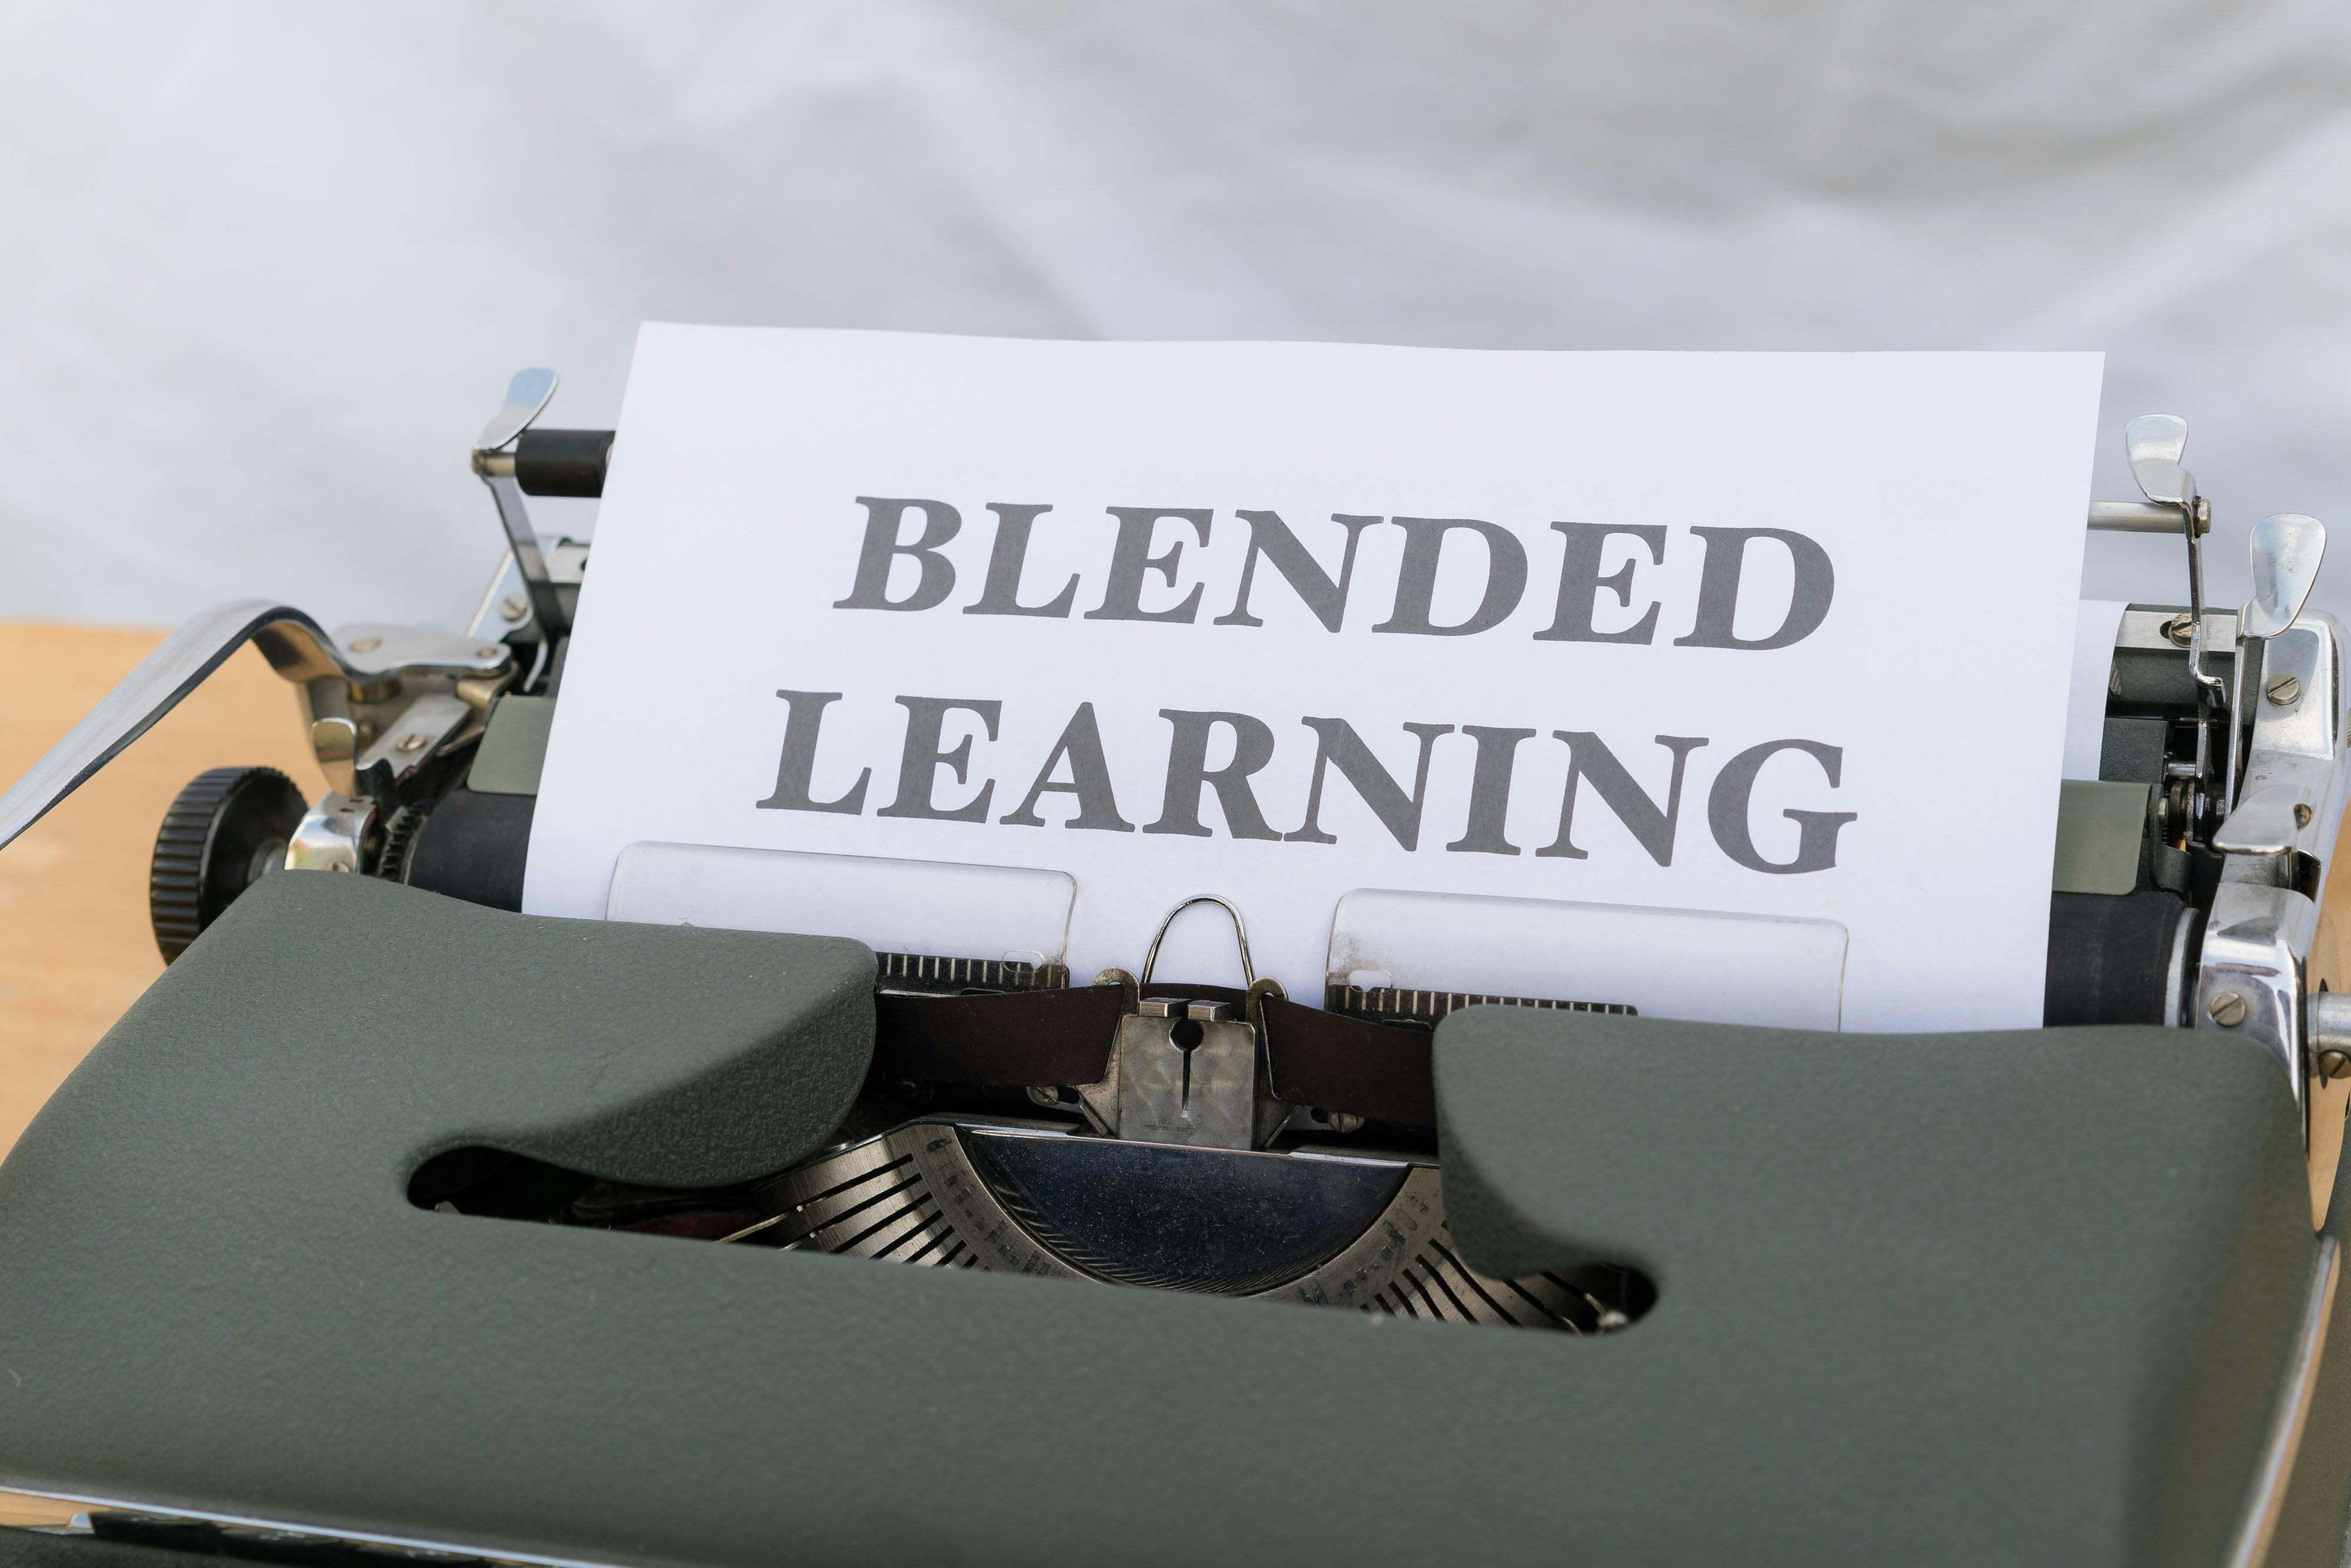 Blended Learning at AUC: An Overview